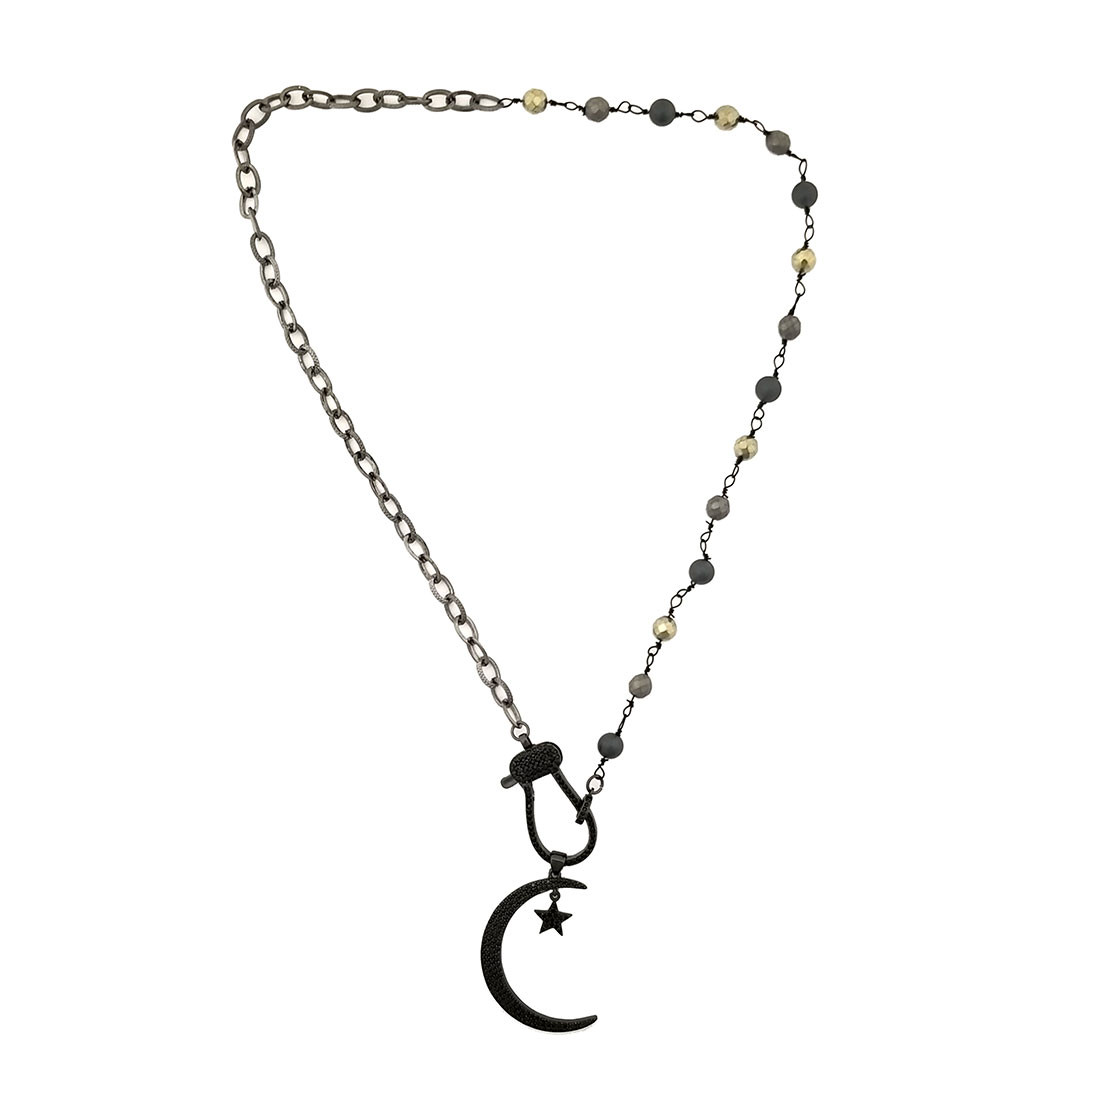 Moon and star bling necklace. 